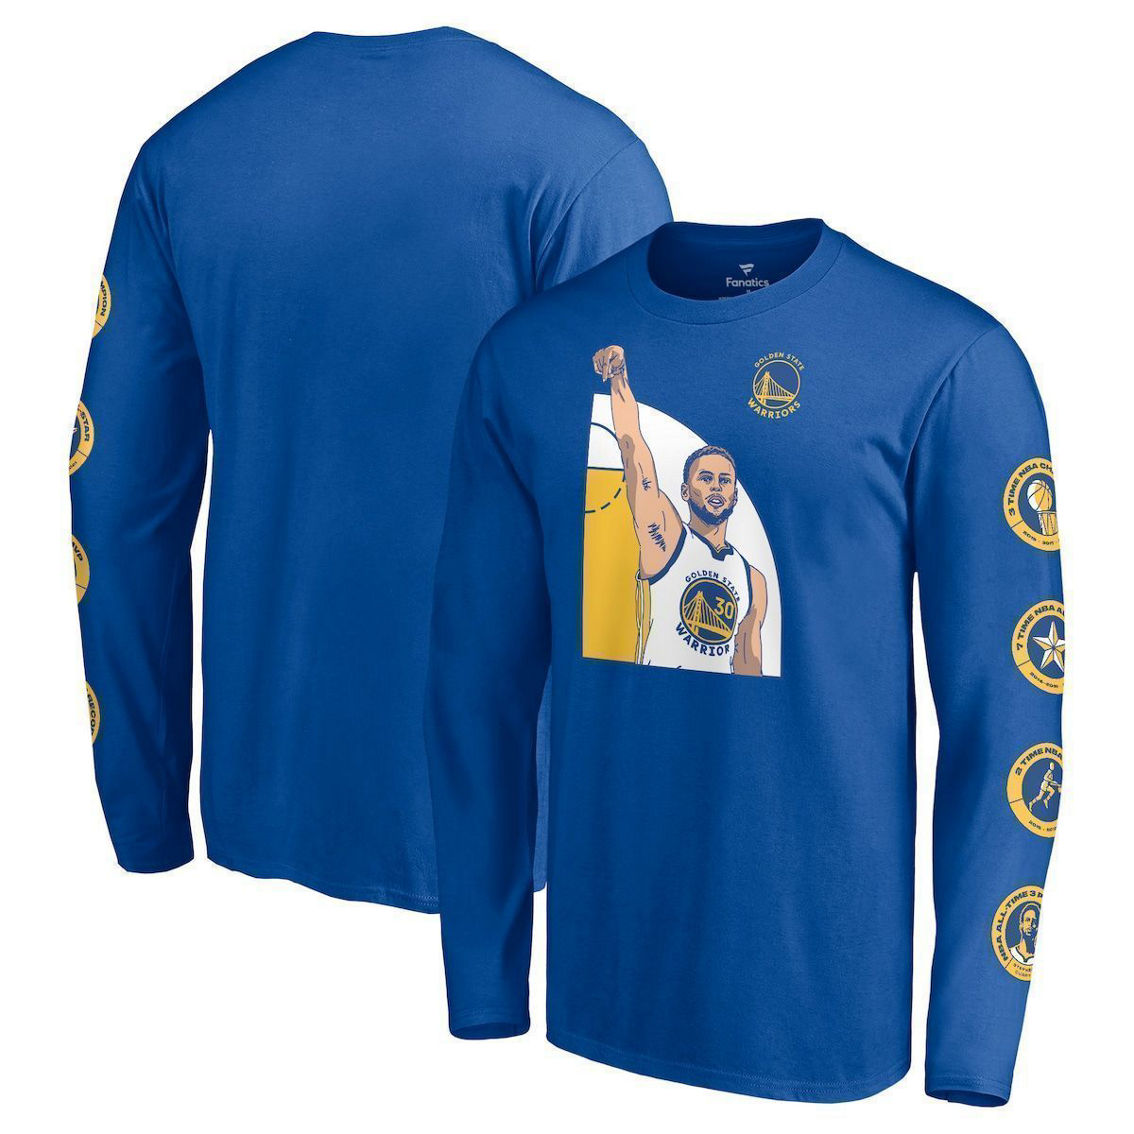 Men's Fanatics Branded Stephen Curry Royal Golden State Warriors NBA All-Time Three Point Record Long Sleeve T-Shirt - Image 1 of 4